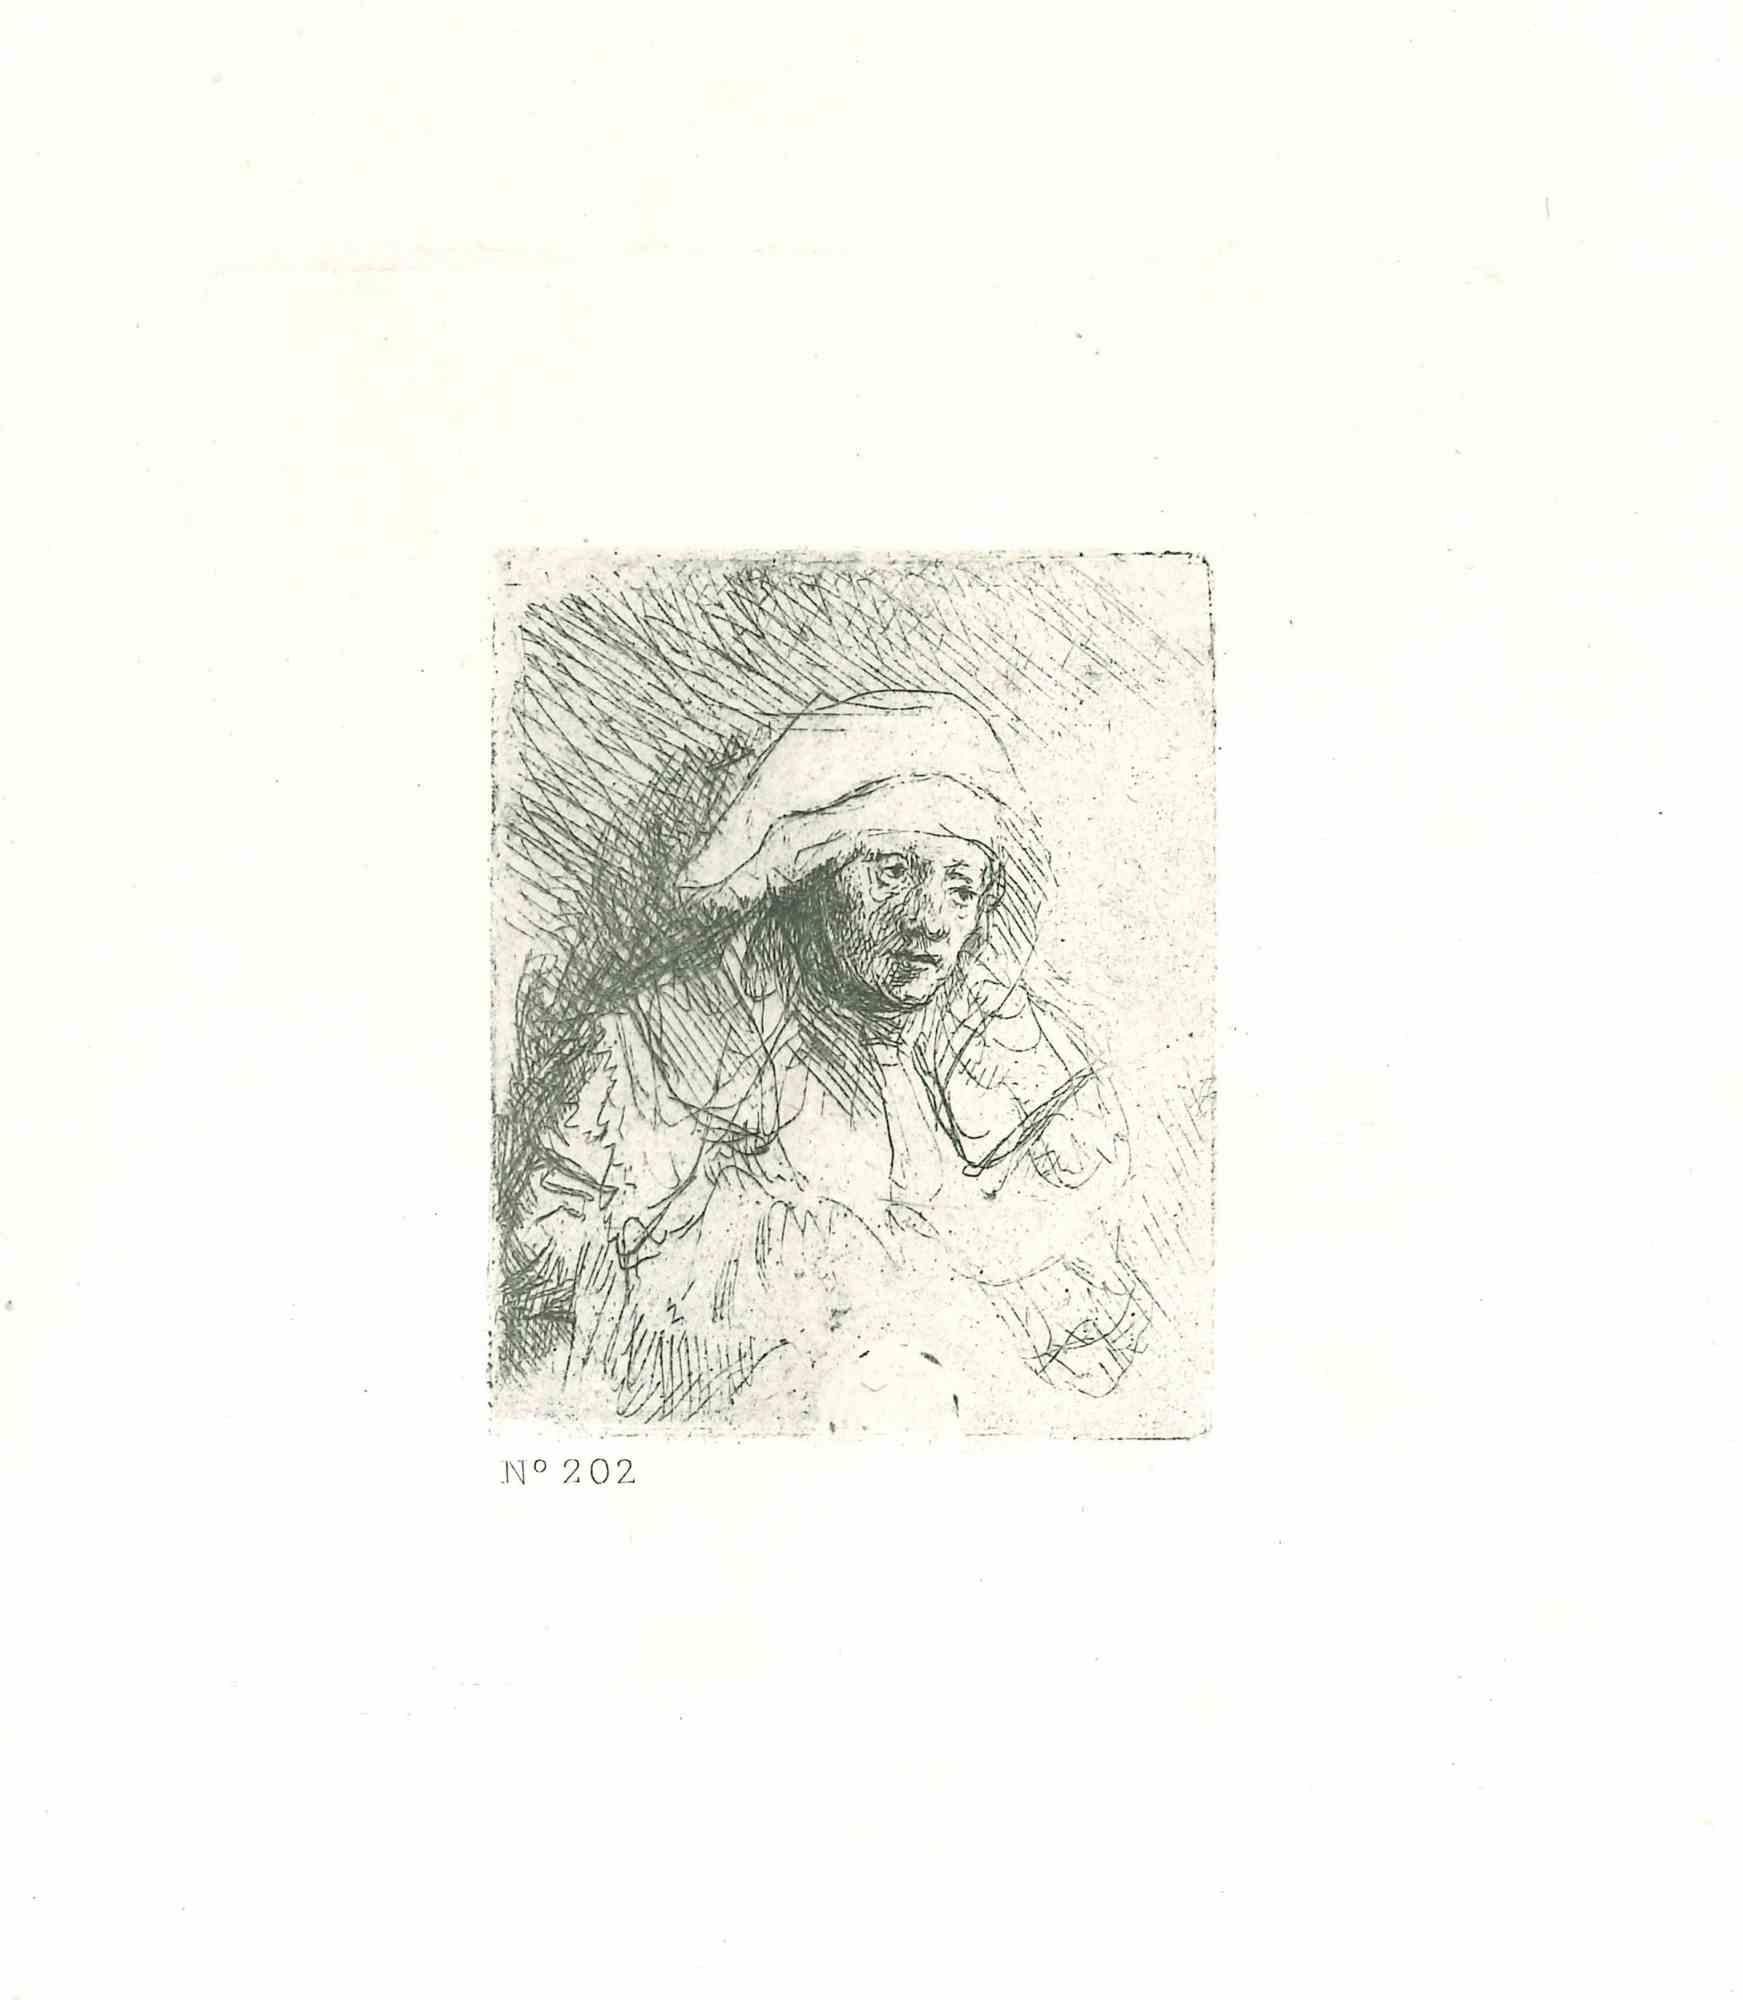 Charles Amand Durand Portrait Print - Sick Woman with a Large White Headdress - Engraving after Rembrandt - 19th Cent.